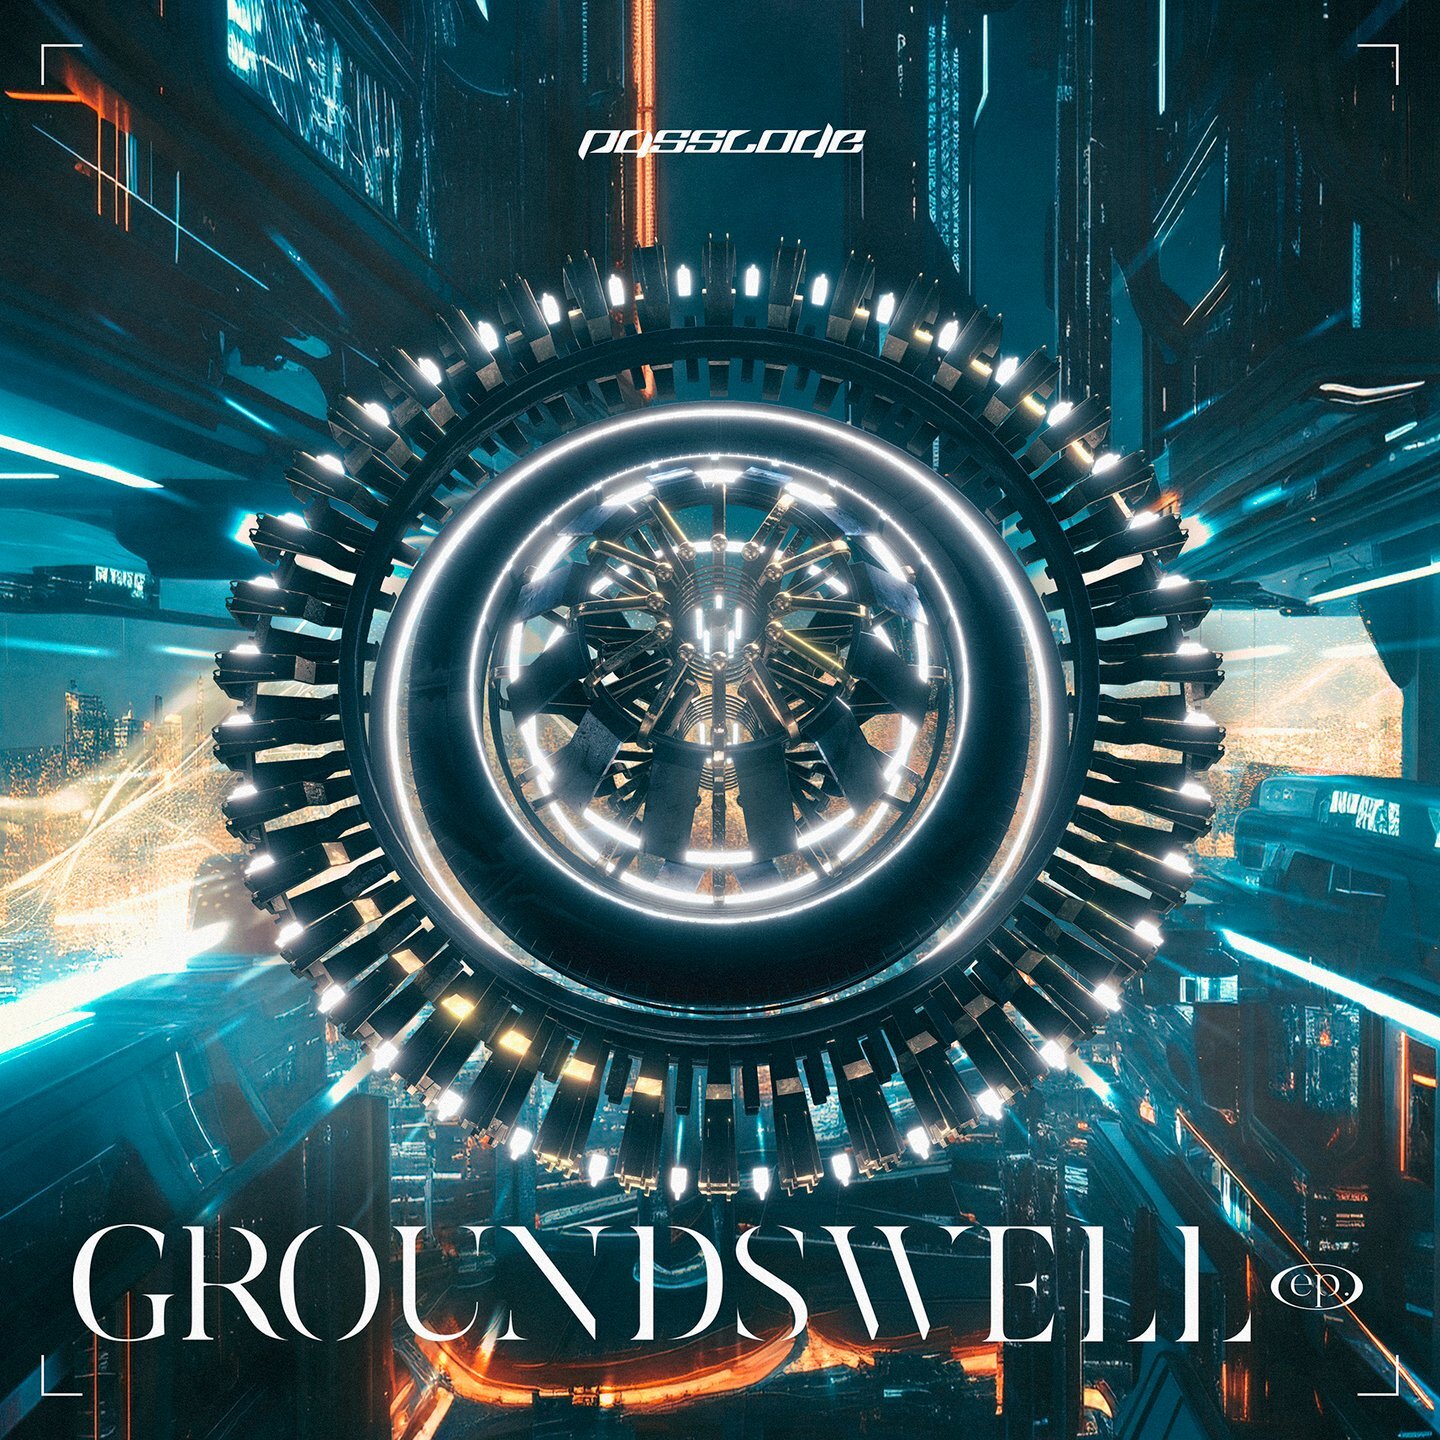 Passcode : Groundswell ep. [CD simple]